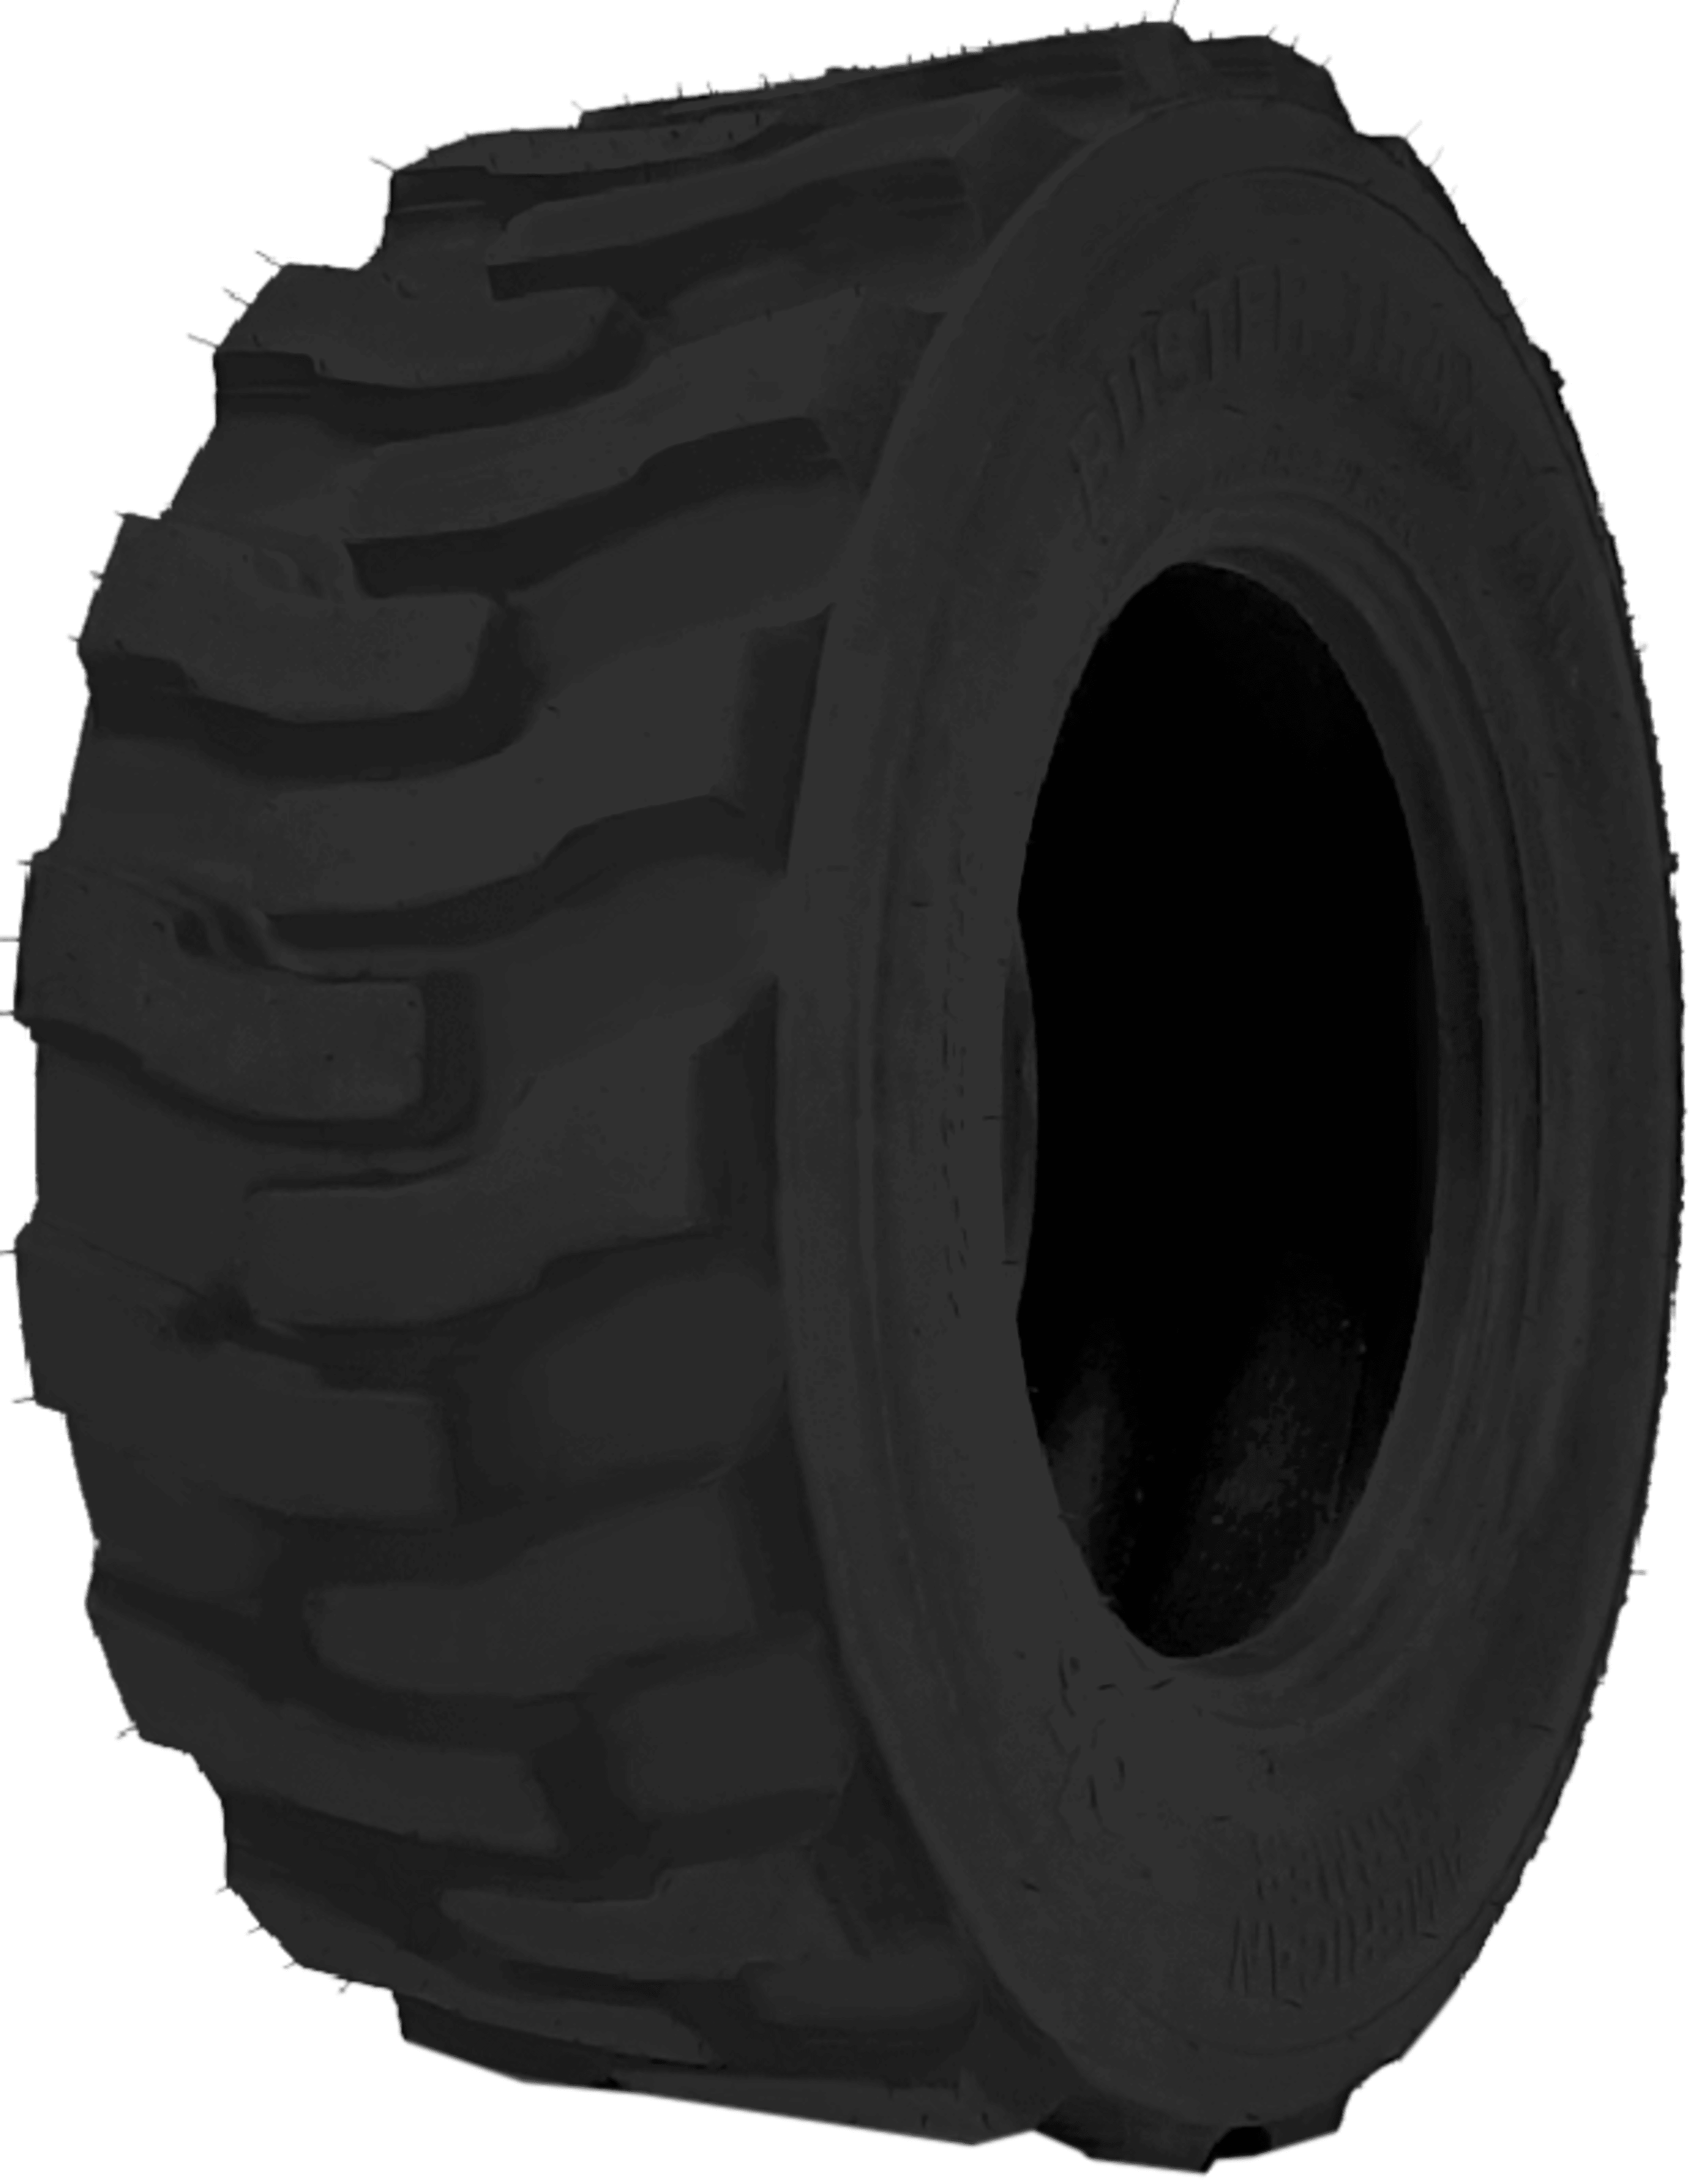 Specialty Tires of America